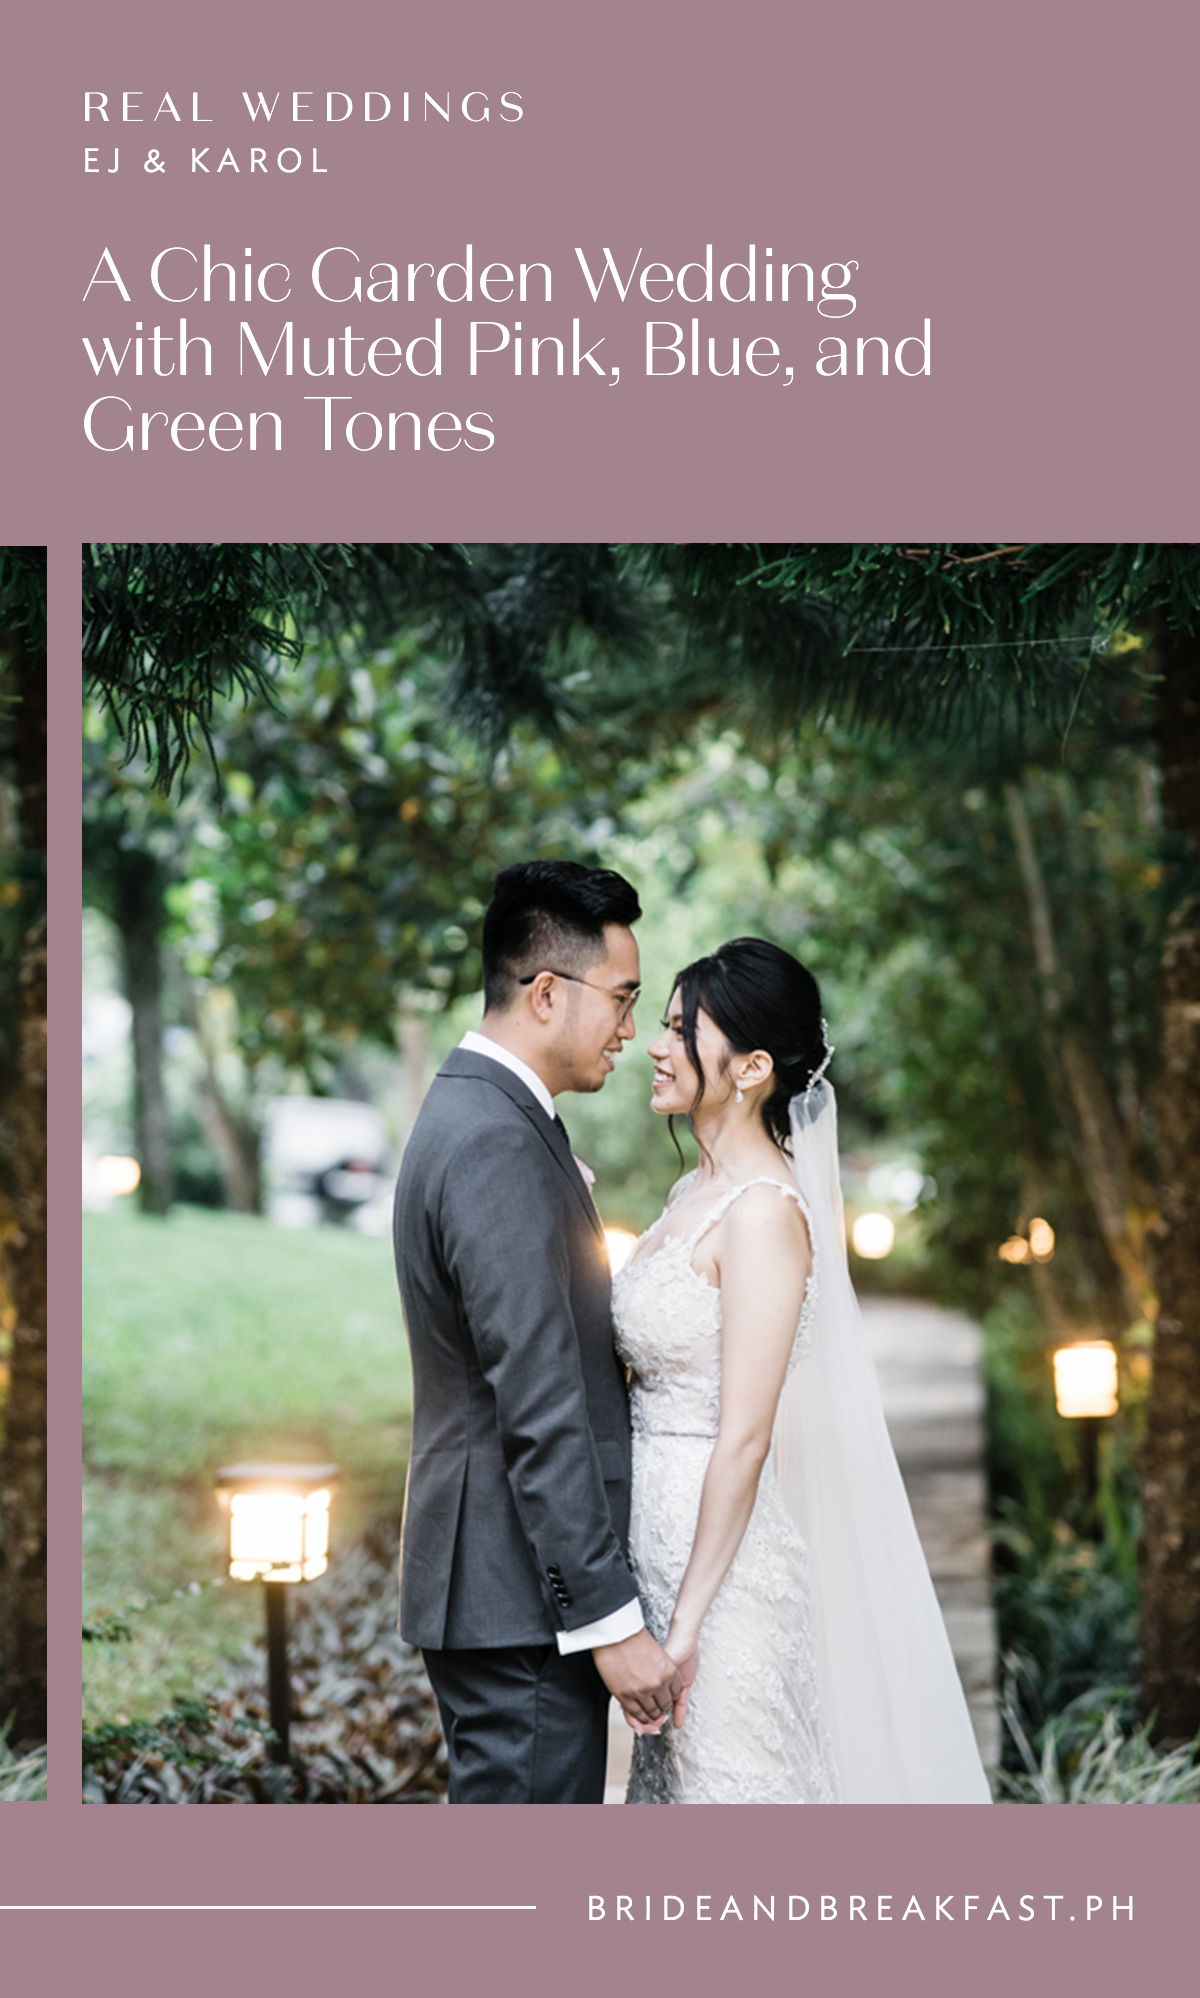 A Chic Garden Wedding with Muted Pink, Blue, and Green Tones